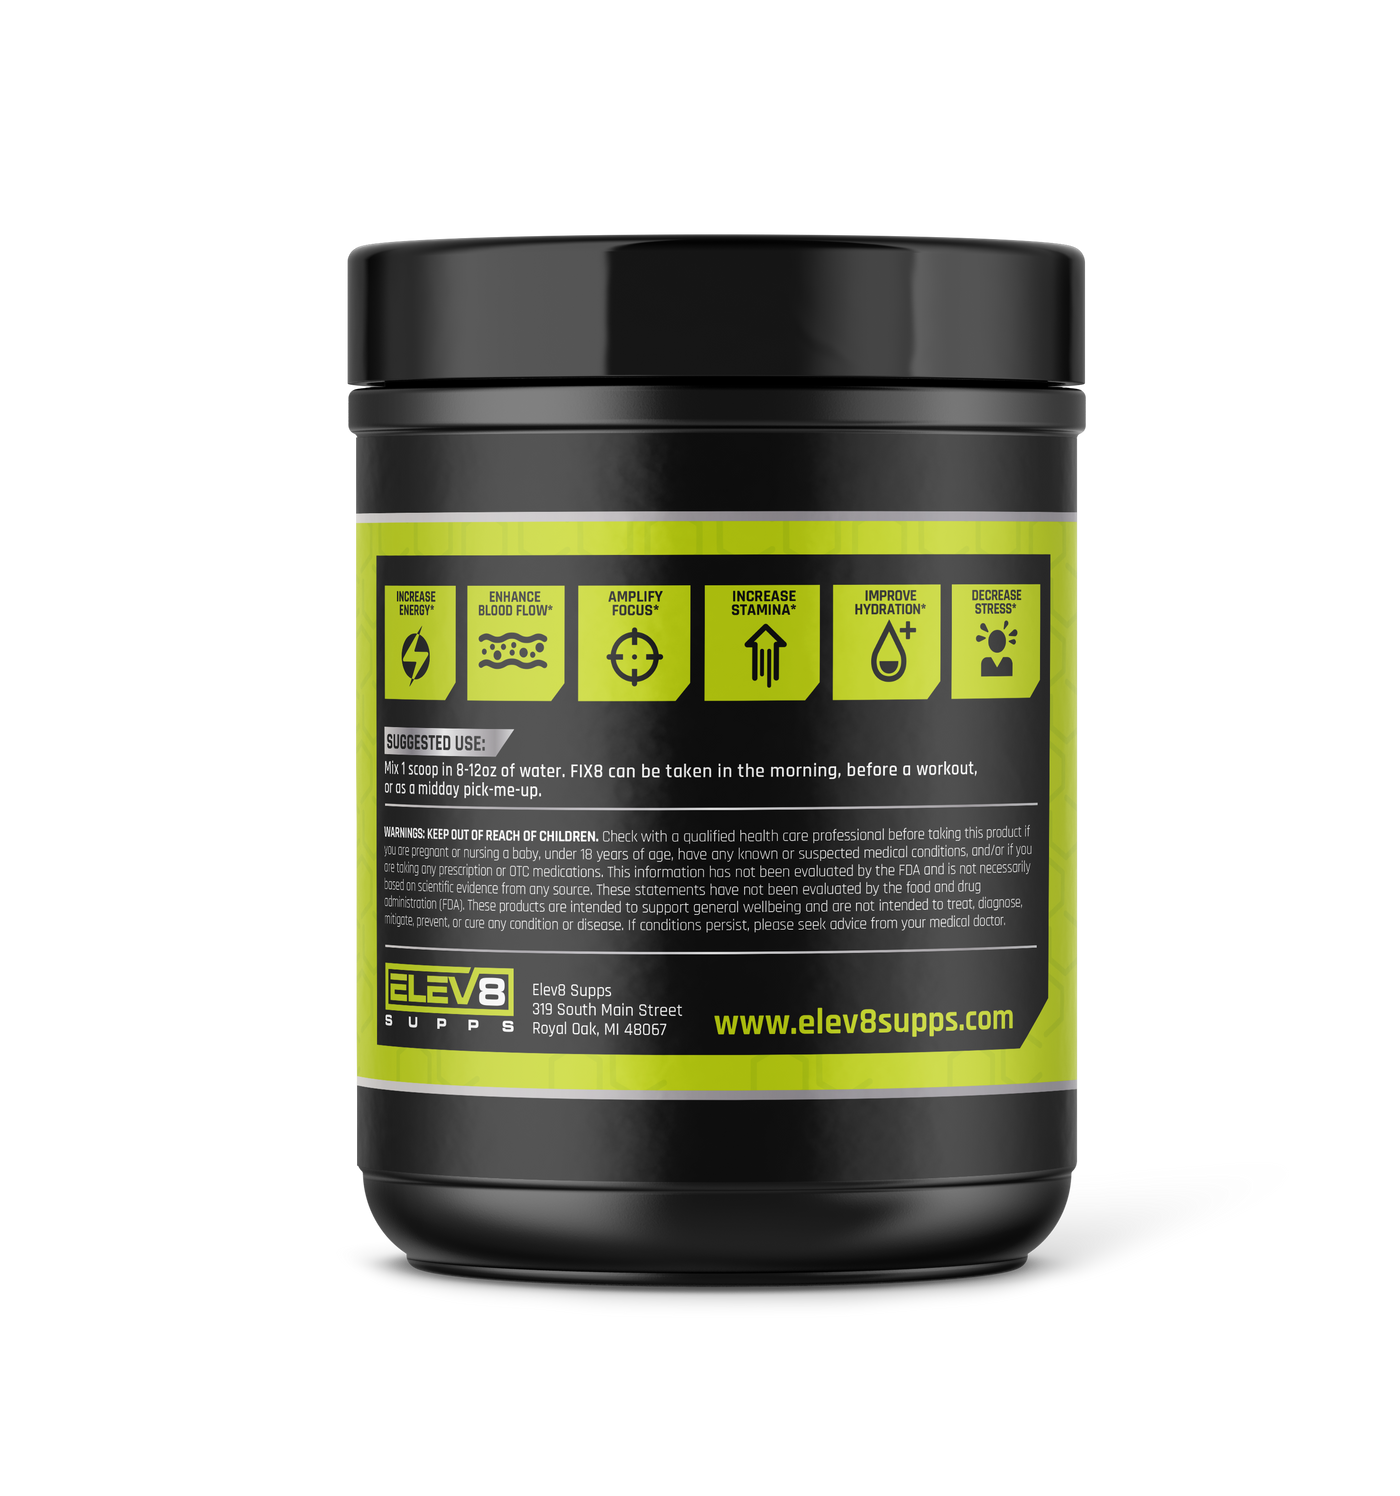 Elev8 Supps | FIX8 (CLEARANCE) Elev8 Supps $34.95